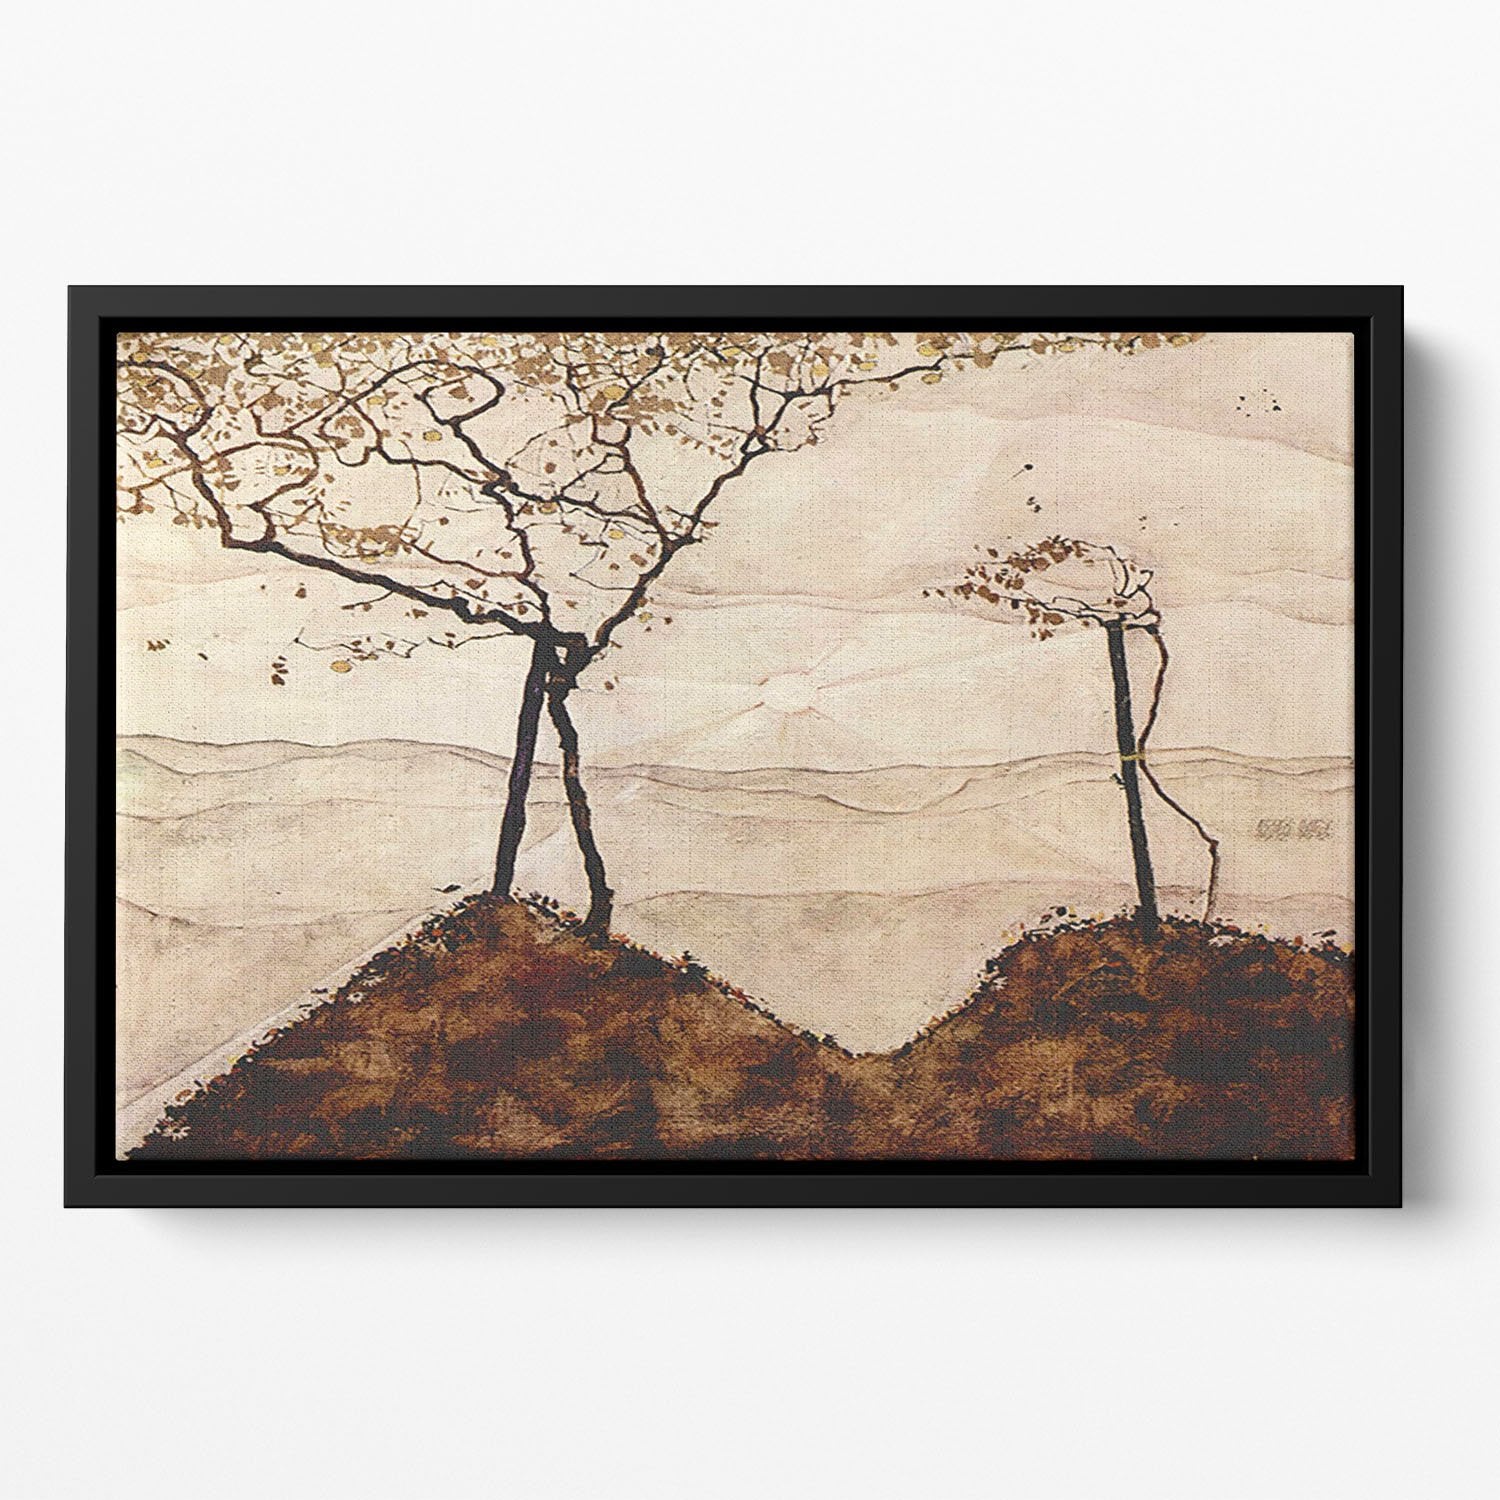 Autumn sun and trees by Egon Schiele Floating Framed Canvas